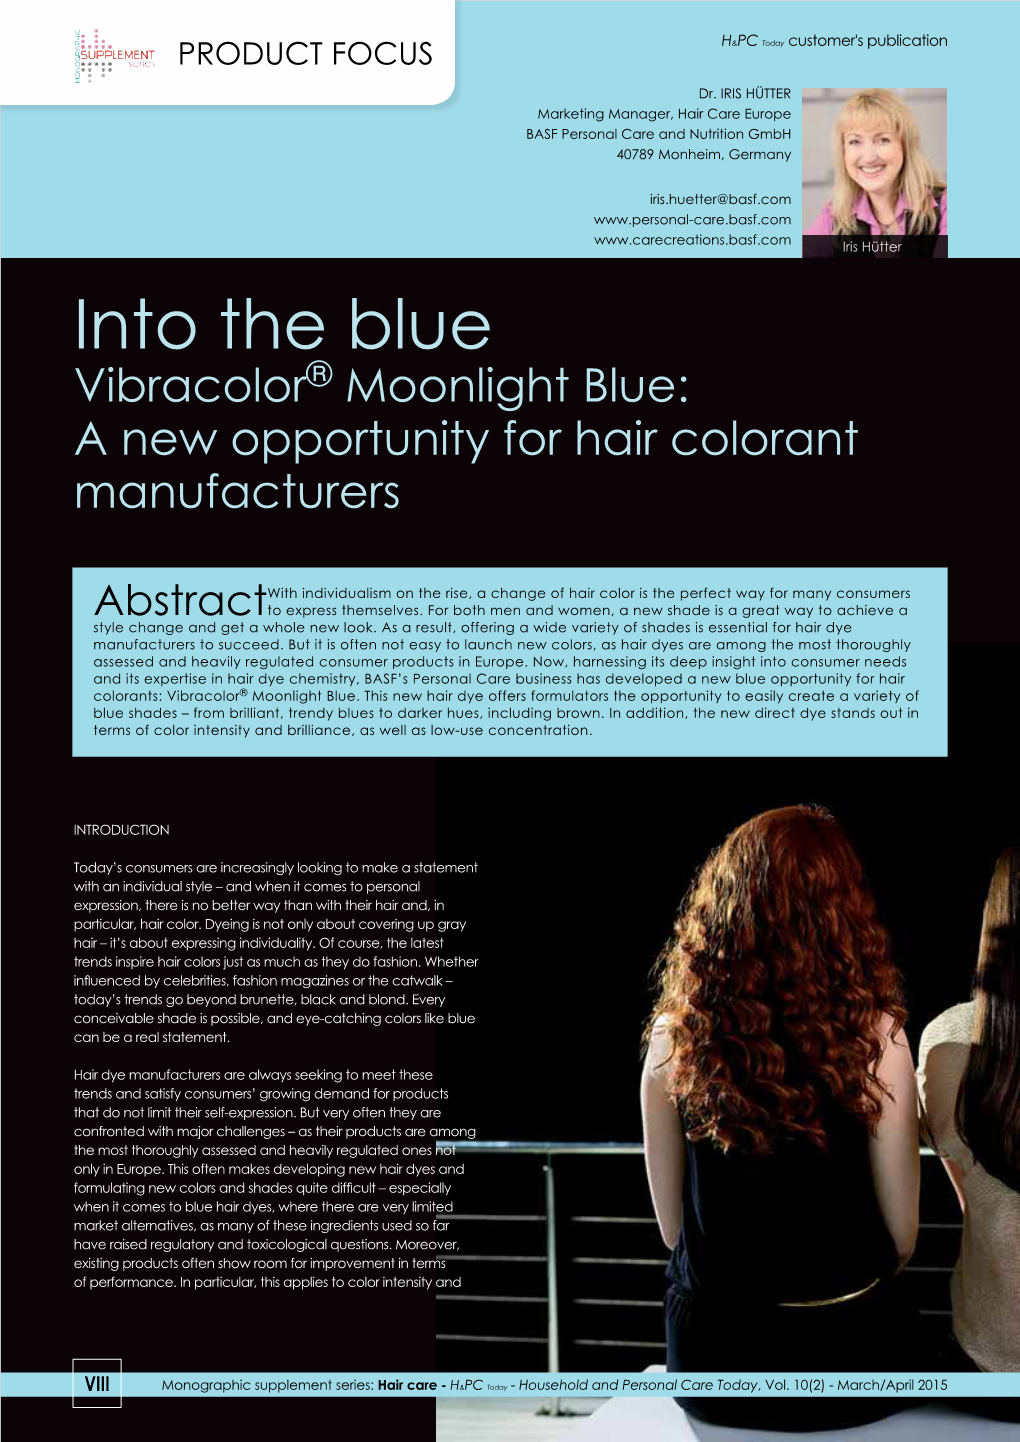 Into the Blue Vibracolor® Moonlight Blue: a New Opportunity for Hair Colorant Manufacturers